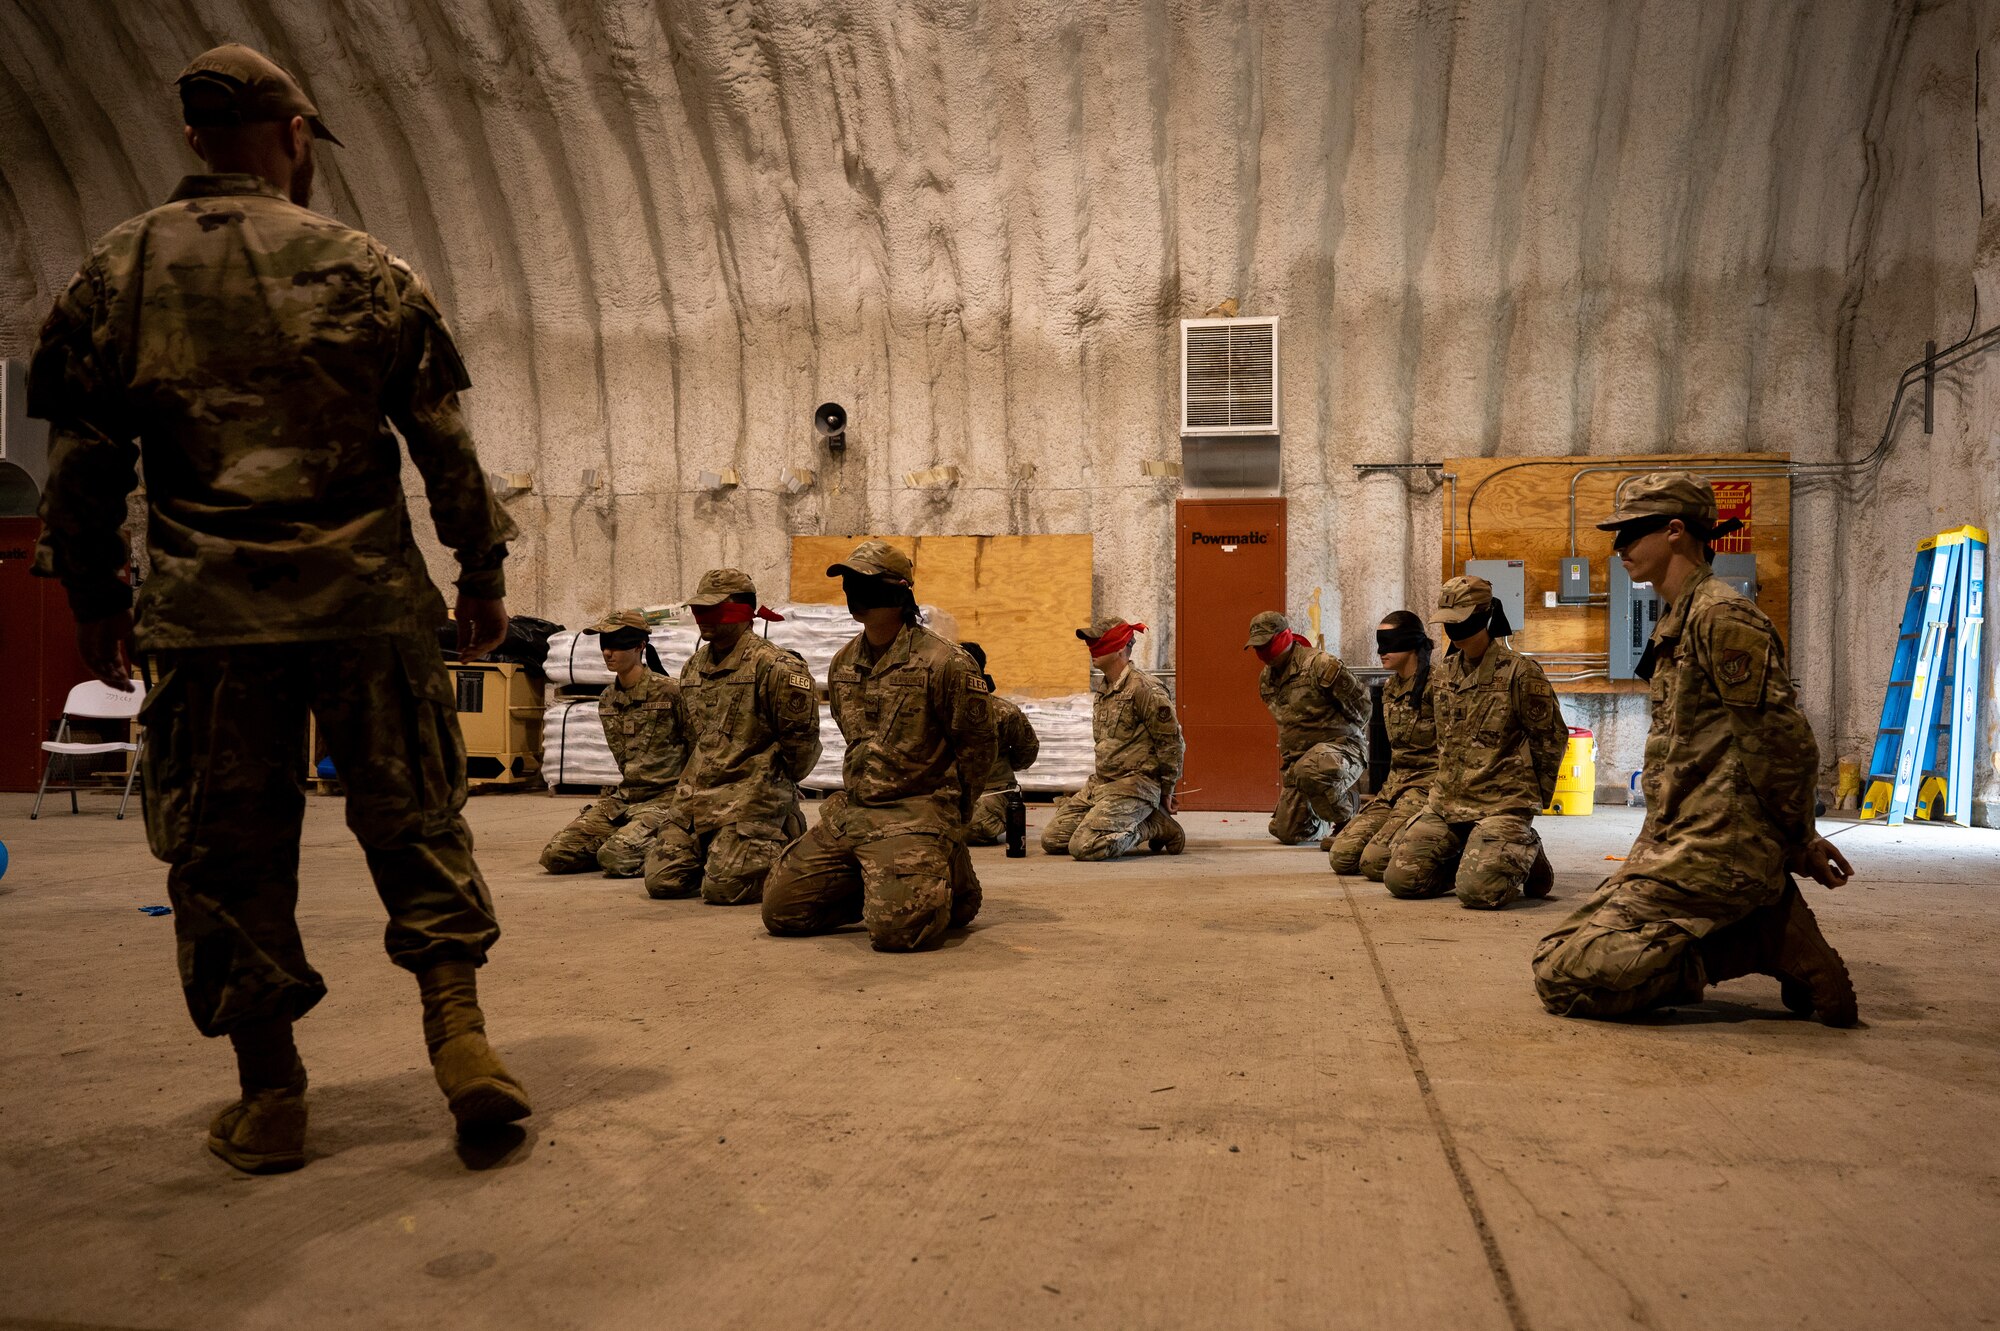 A photo of a group of blindfolded Airmen